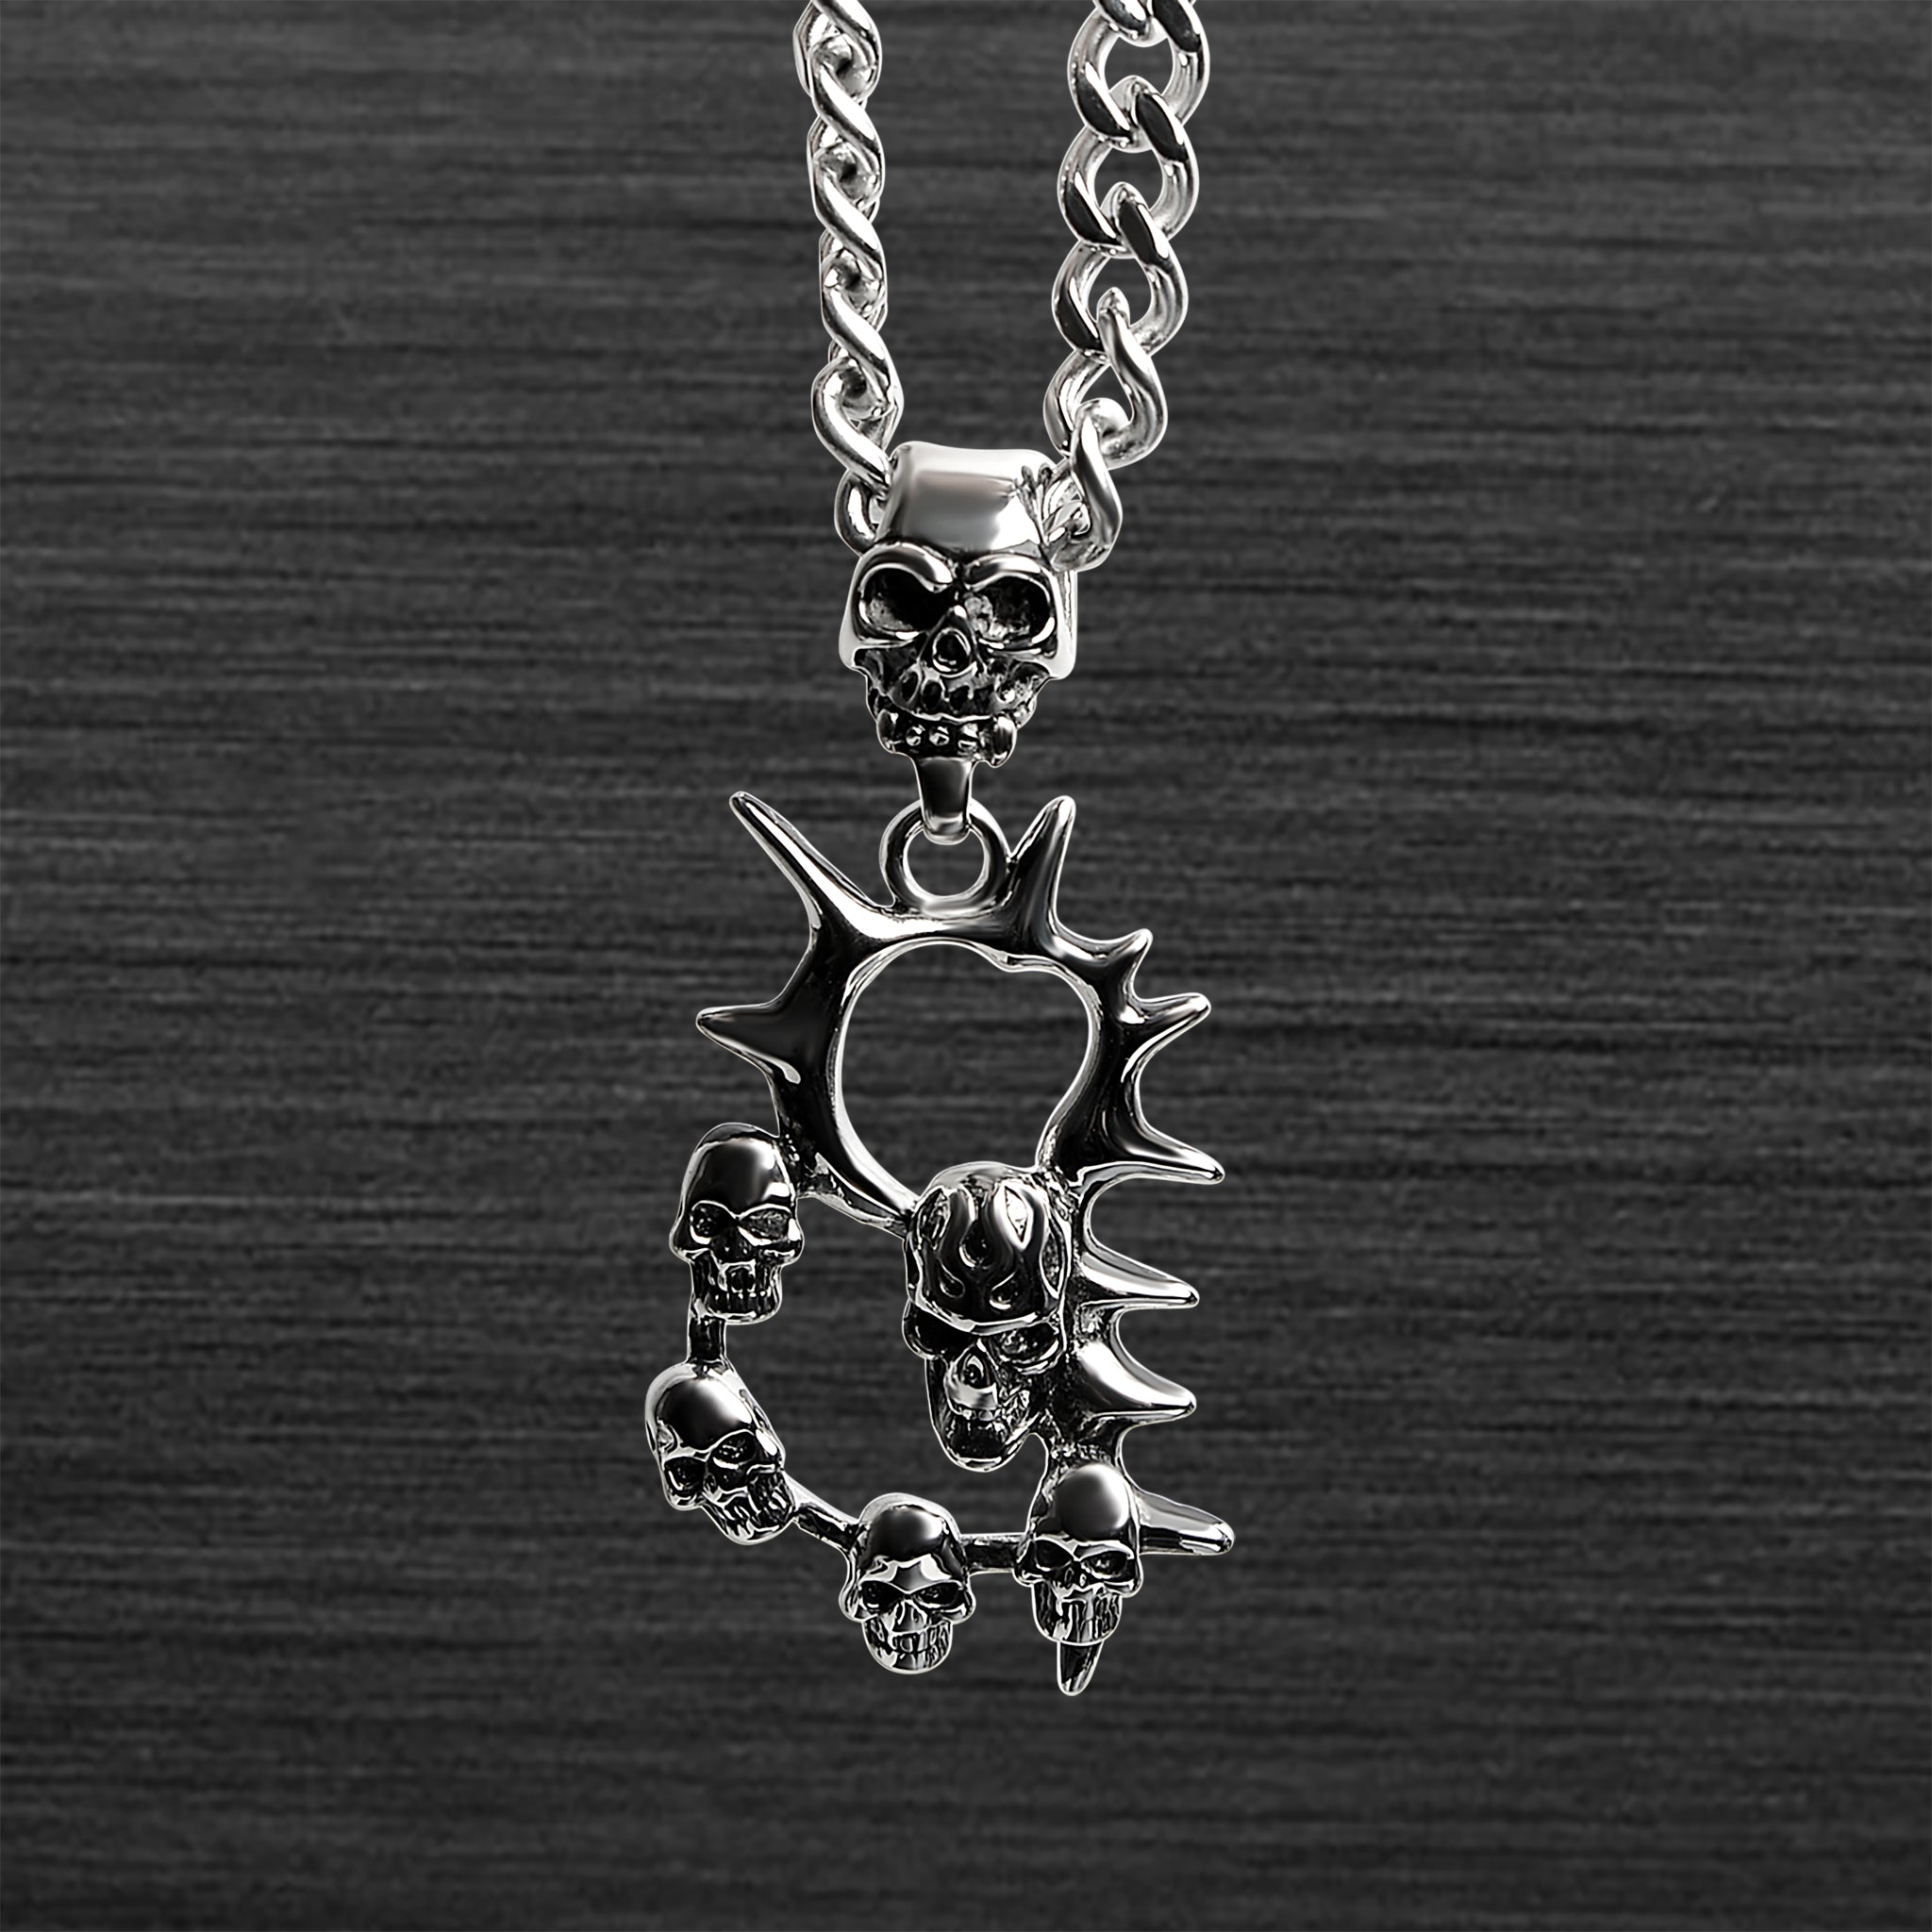 Stainless Steel Multi SKULL Spike Curb Chain Necklace / PDK0137-RTL